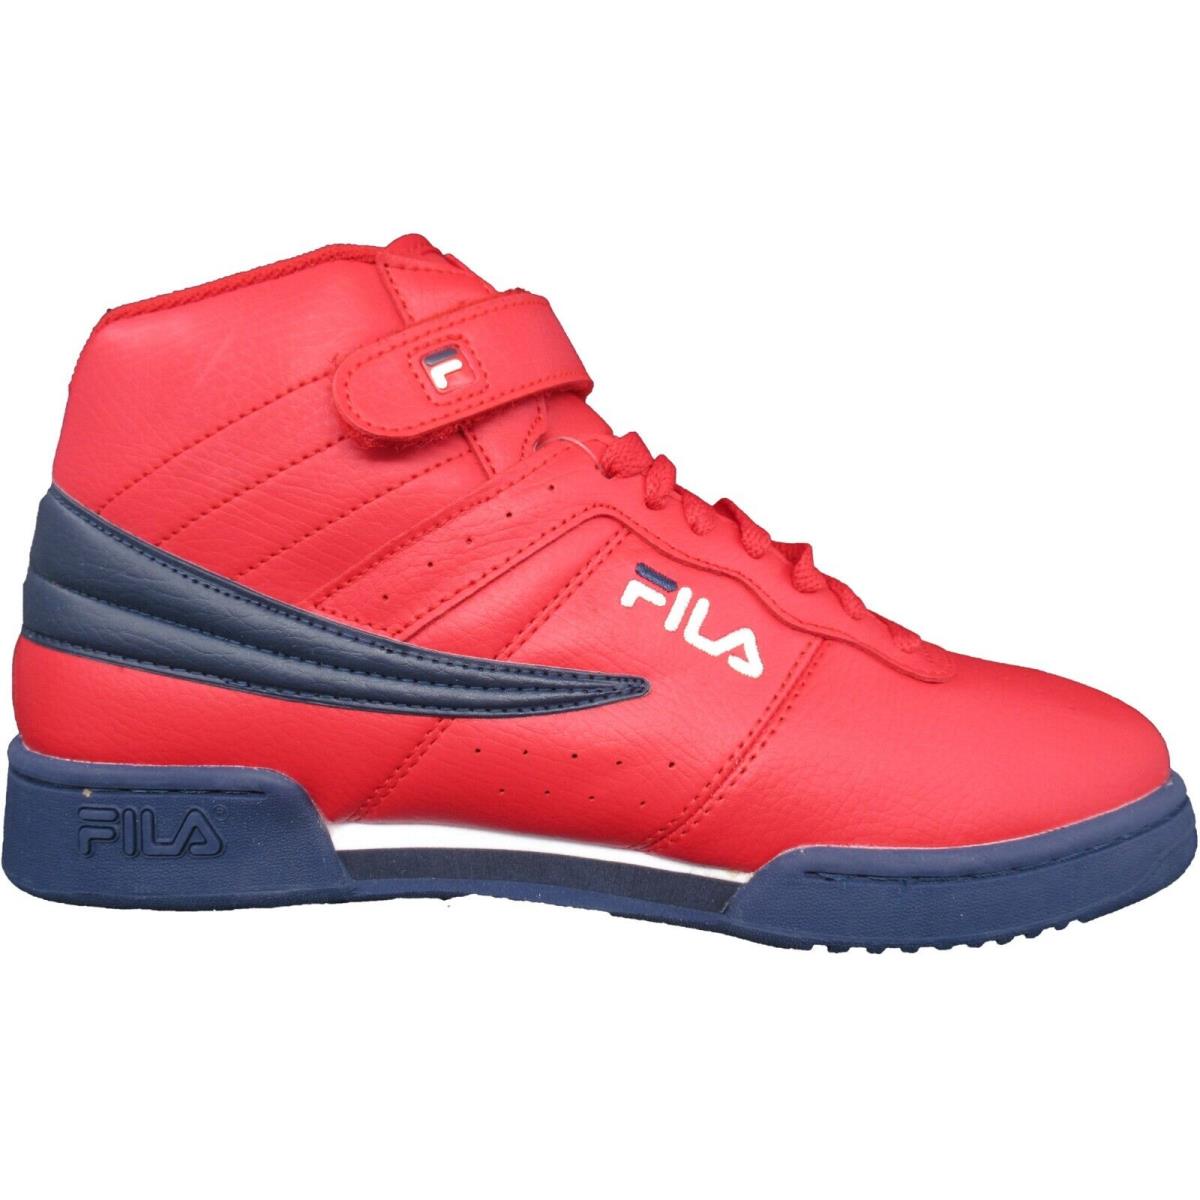 Fila Men`s F-13 Classic Casual Athletic Shoes 1VF059LX-640 - Red, Navy, White